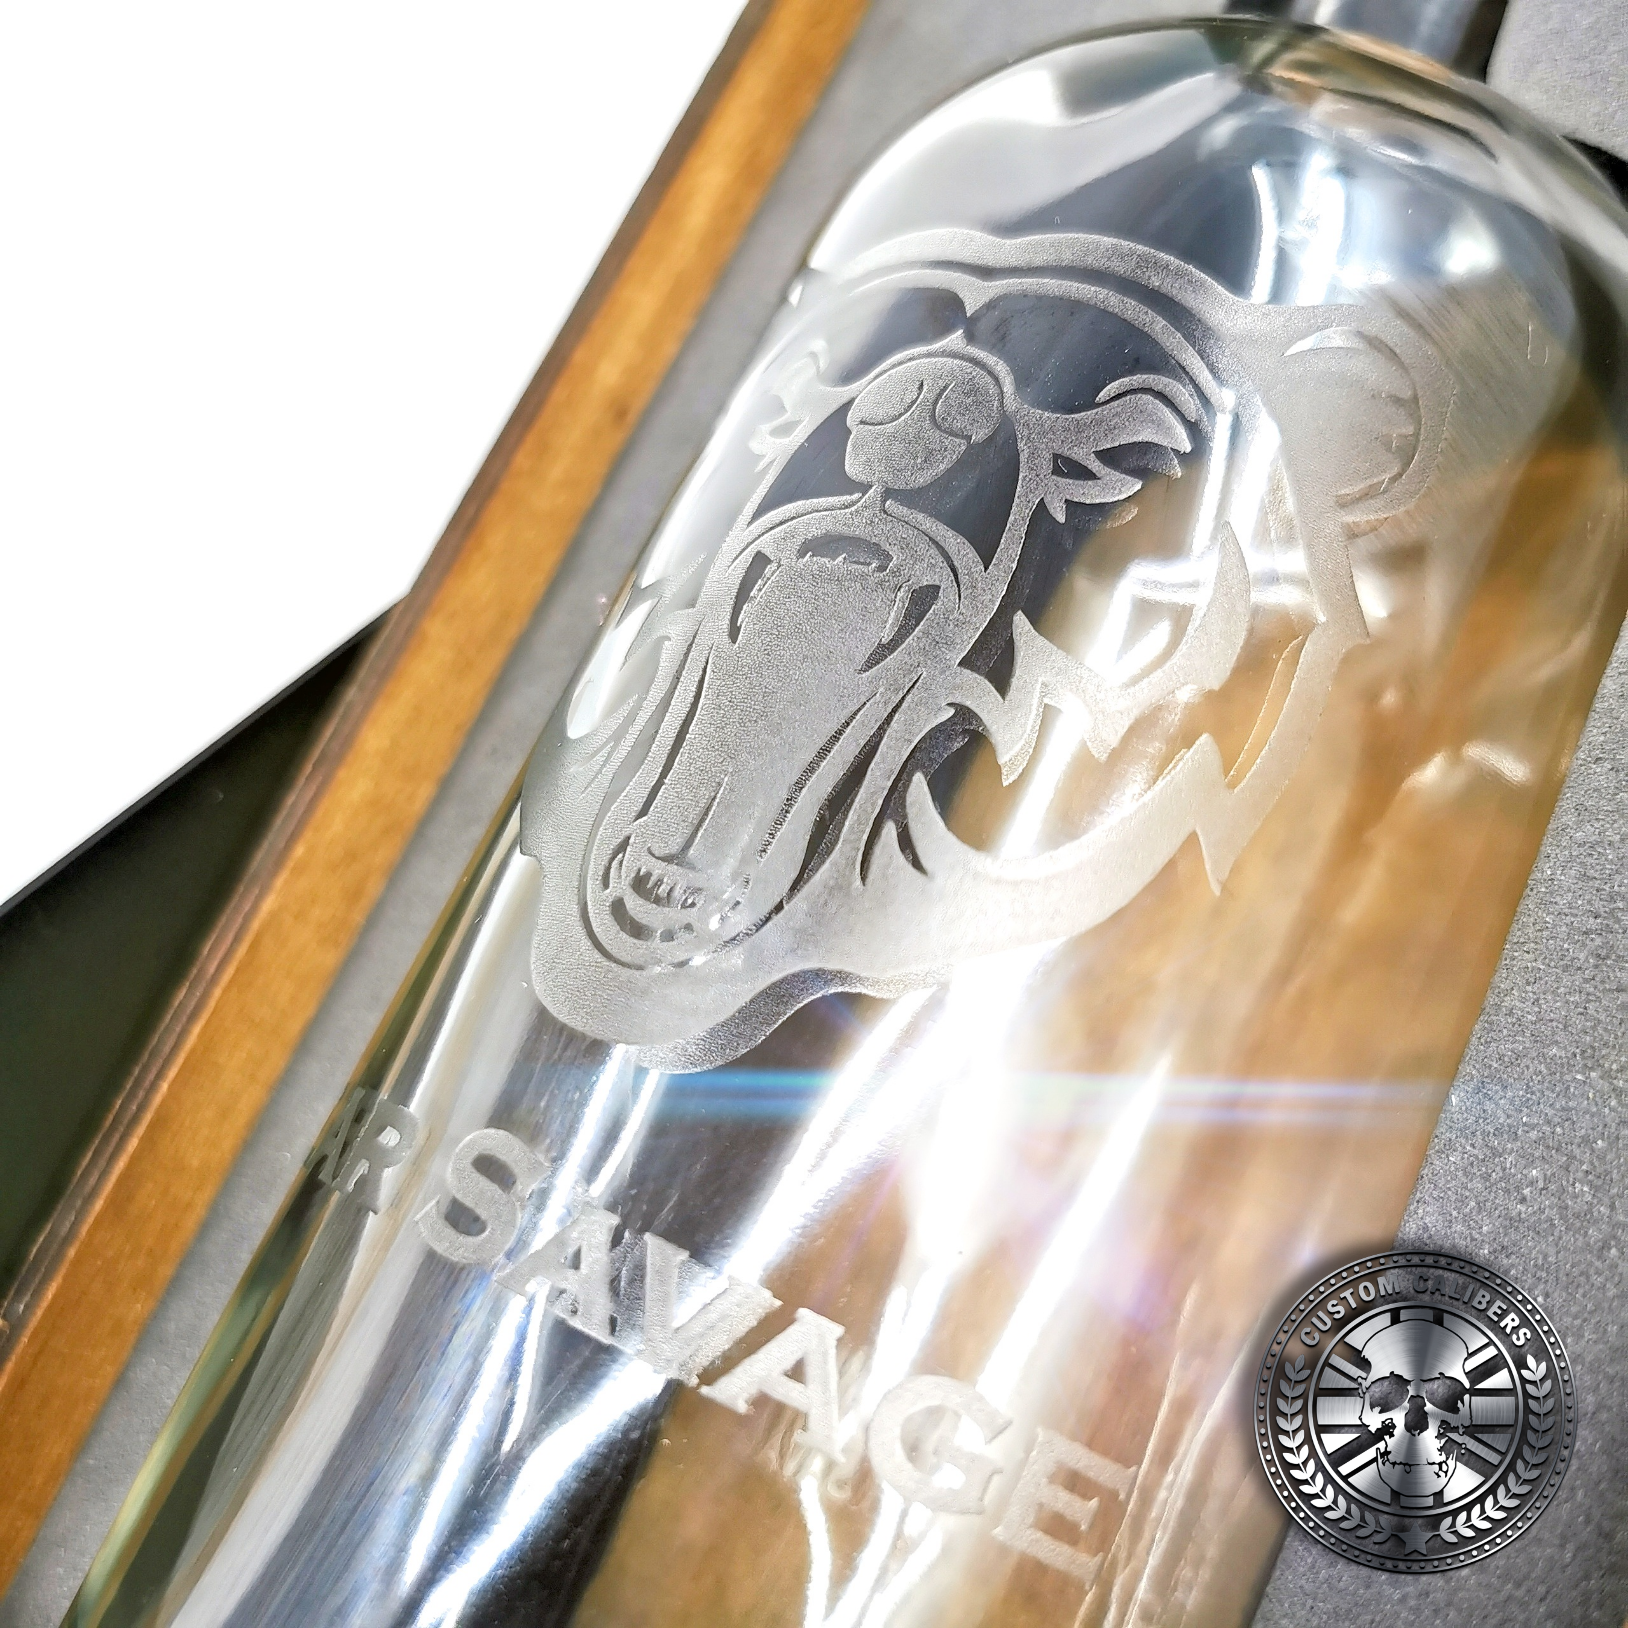 a close up of an engraved whisky bottle gift set